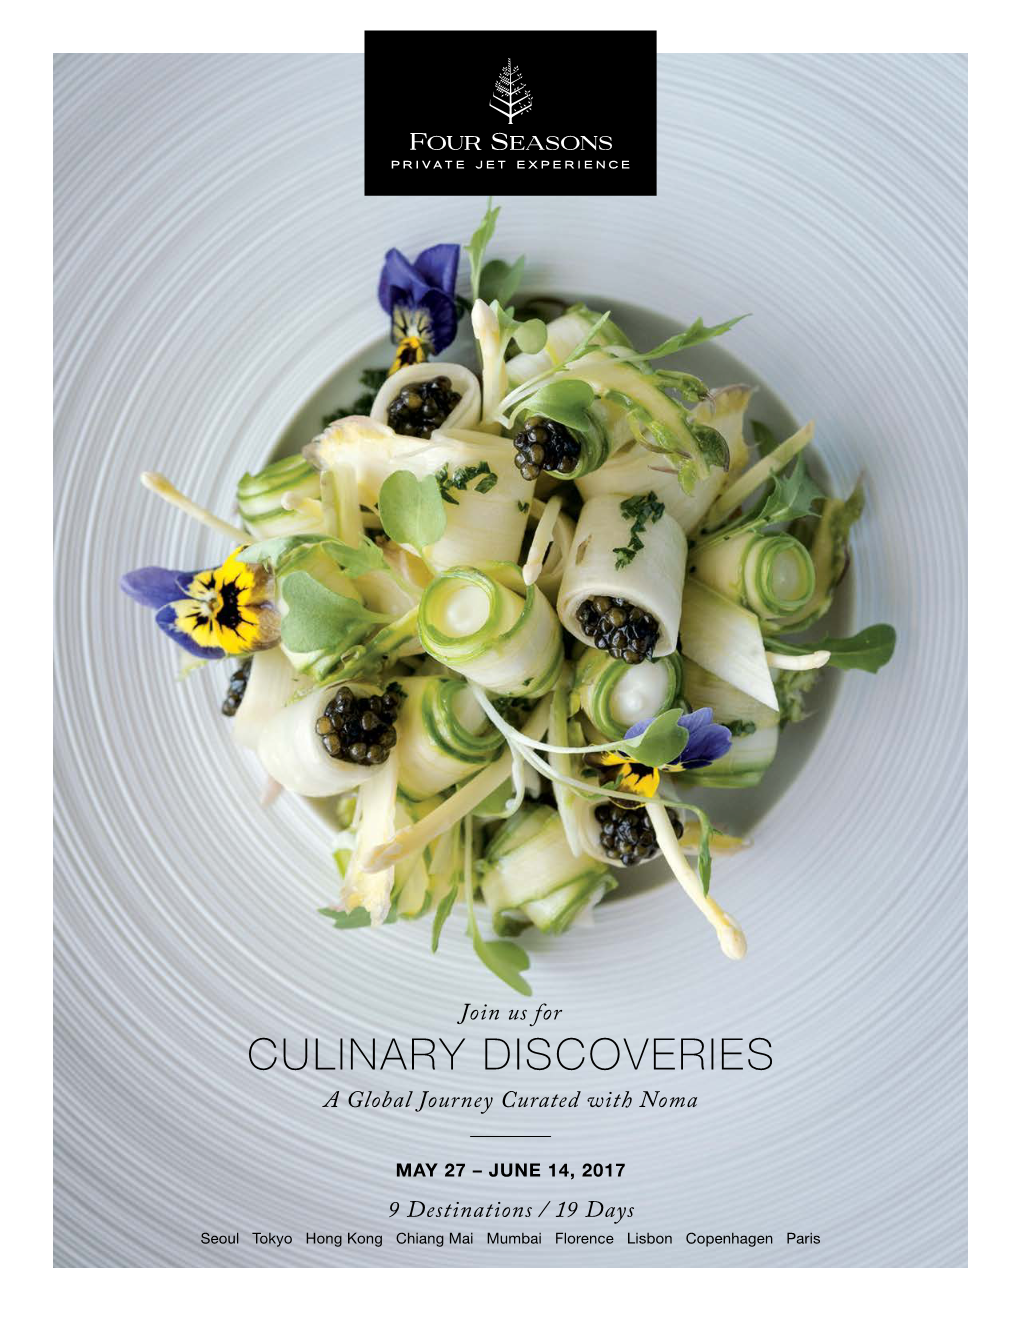 CULINARY DISCOVERIES a Global Journey Curated with Noma